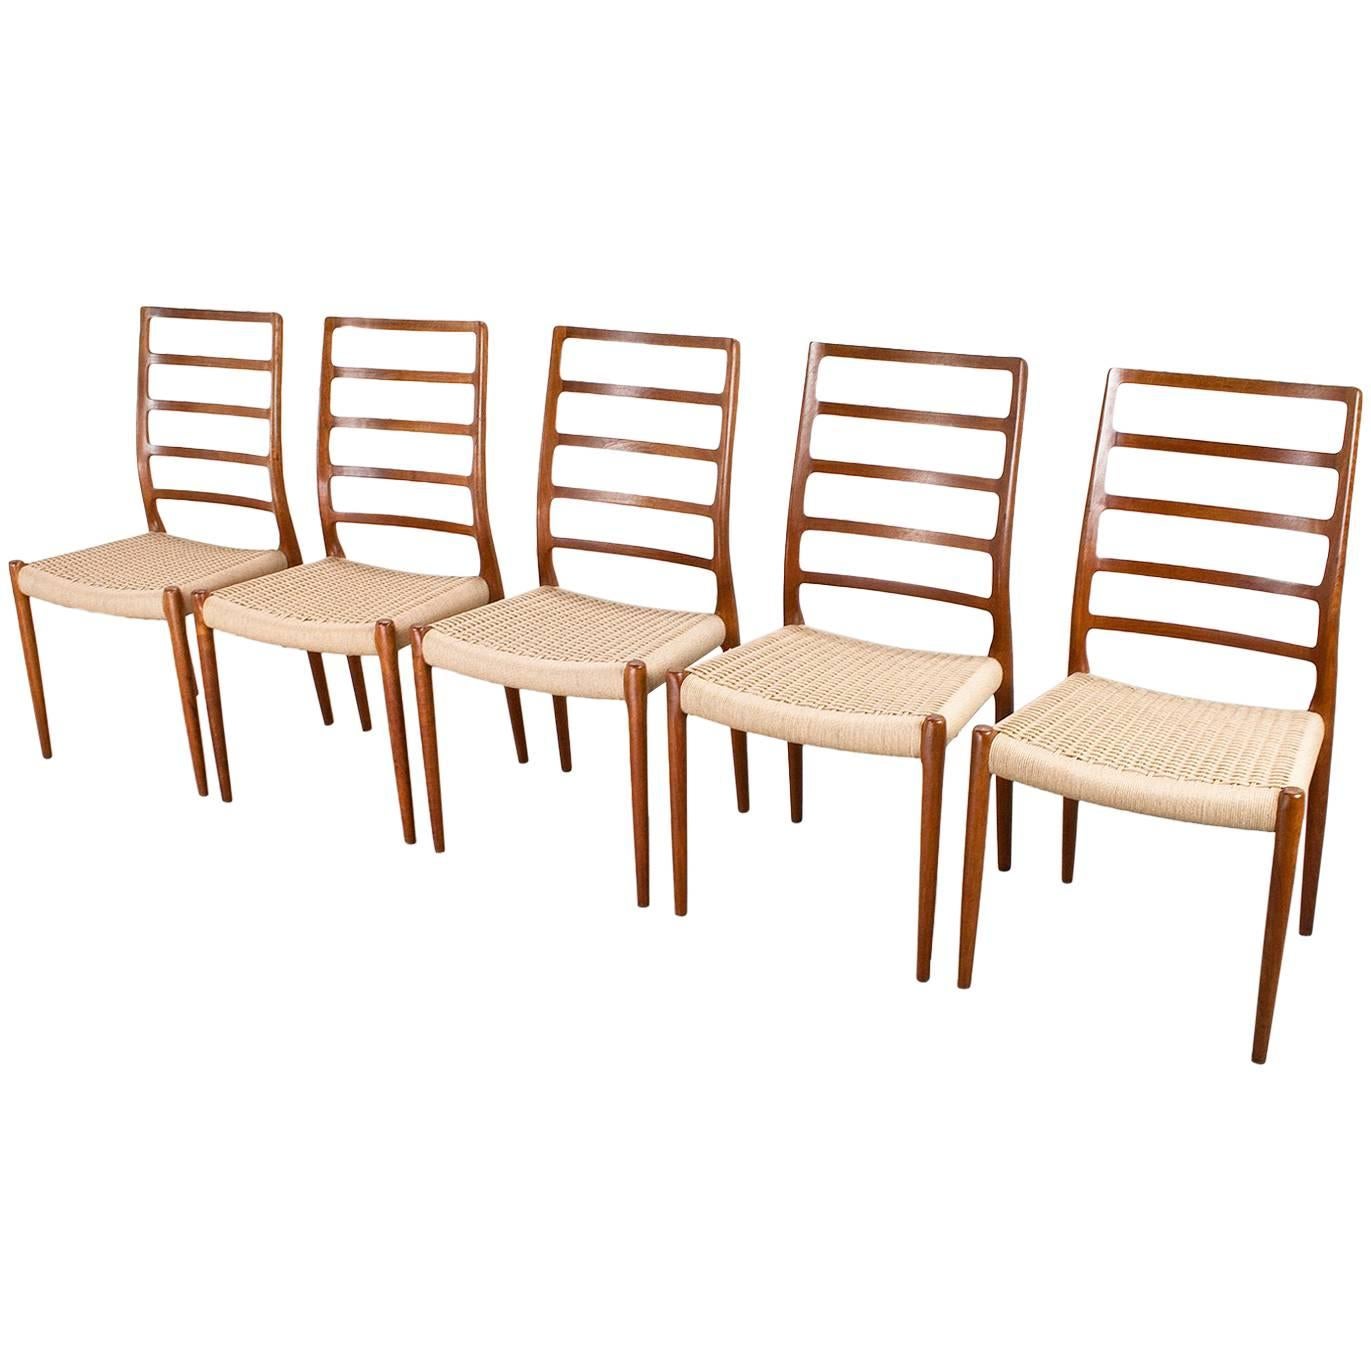 Set of 5 Scandinavian Modern Chairs in teak and paper cord by Niels Moller